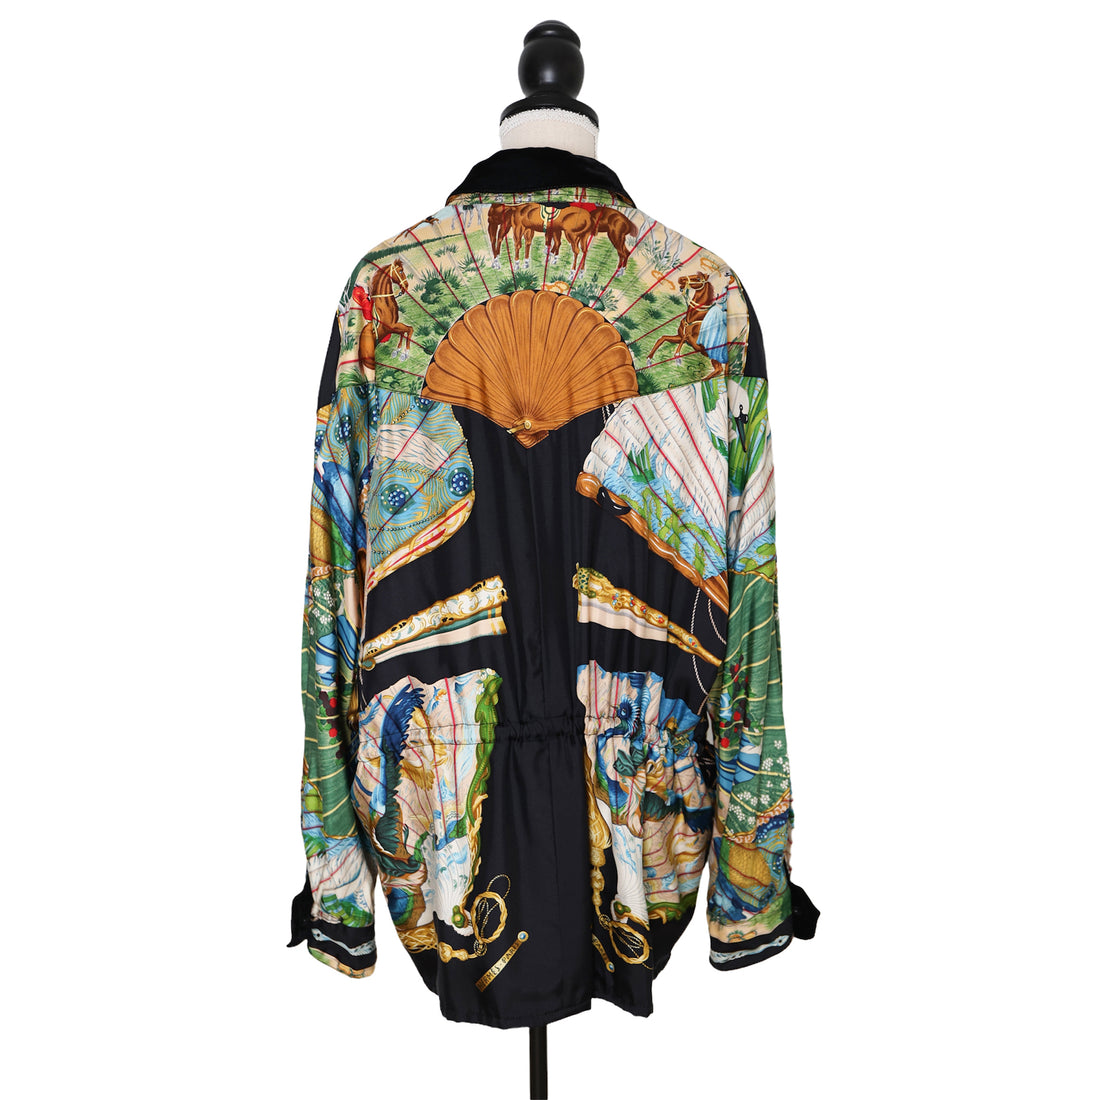 Hermès "Brise de Charme" reversible silk and velvet jacket with matching top